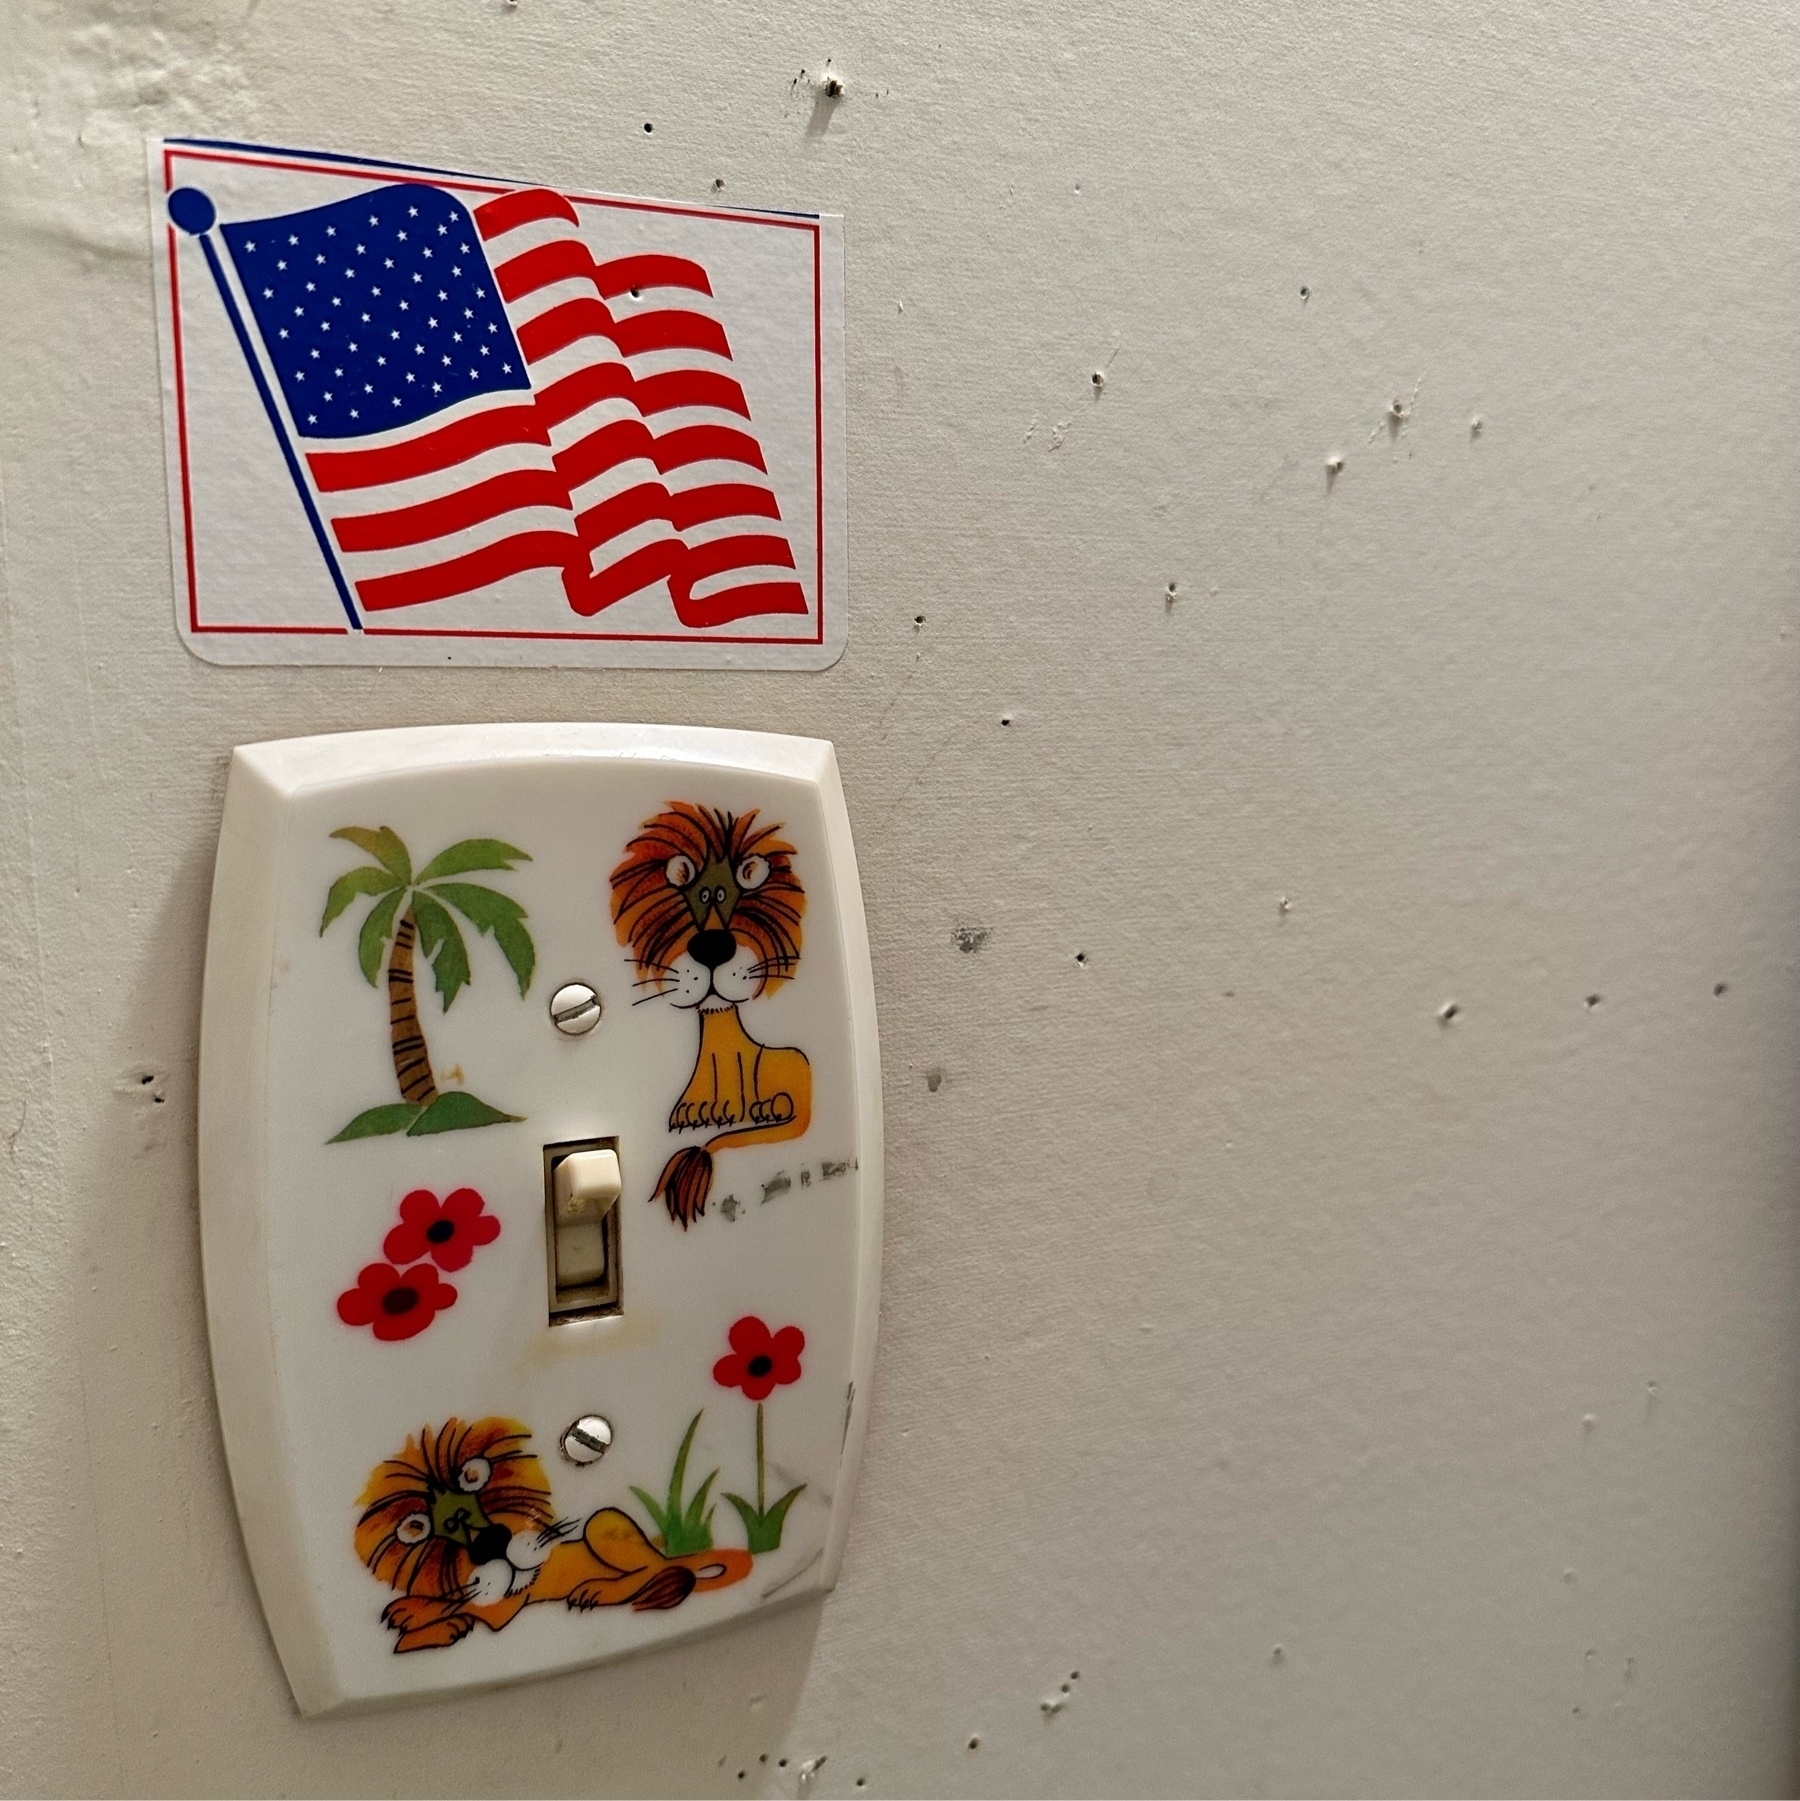 Photograph of a gaudy lightswitch plate with an U.S. flag sticker on the wall above it.